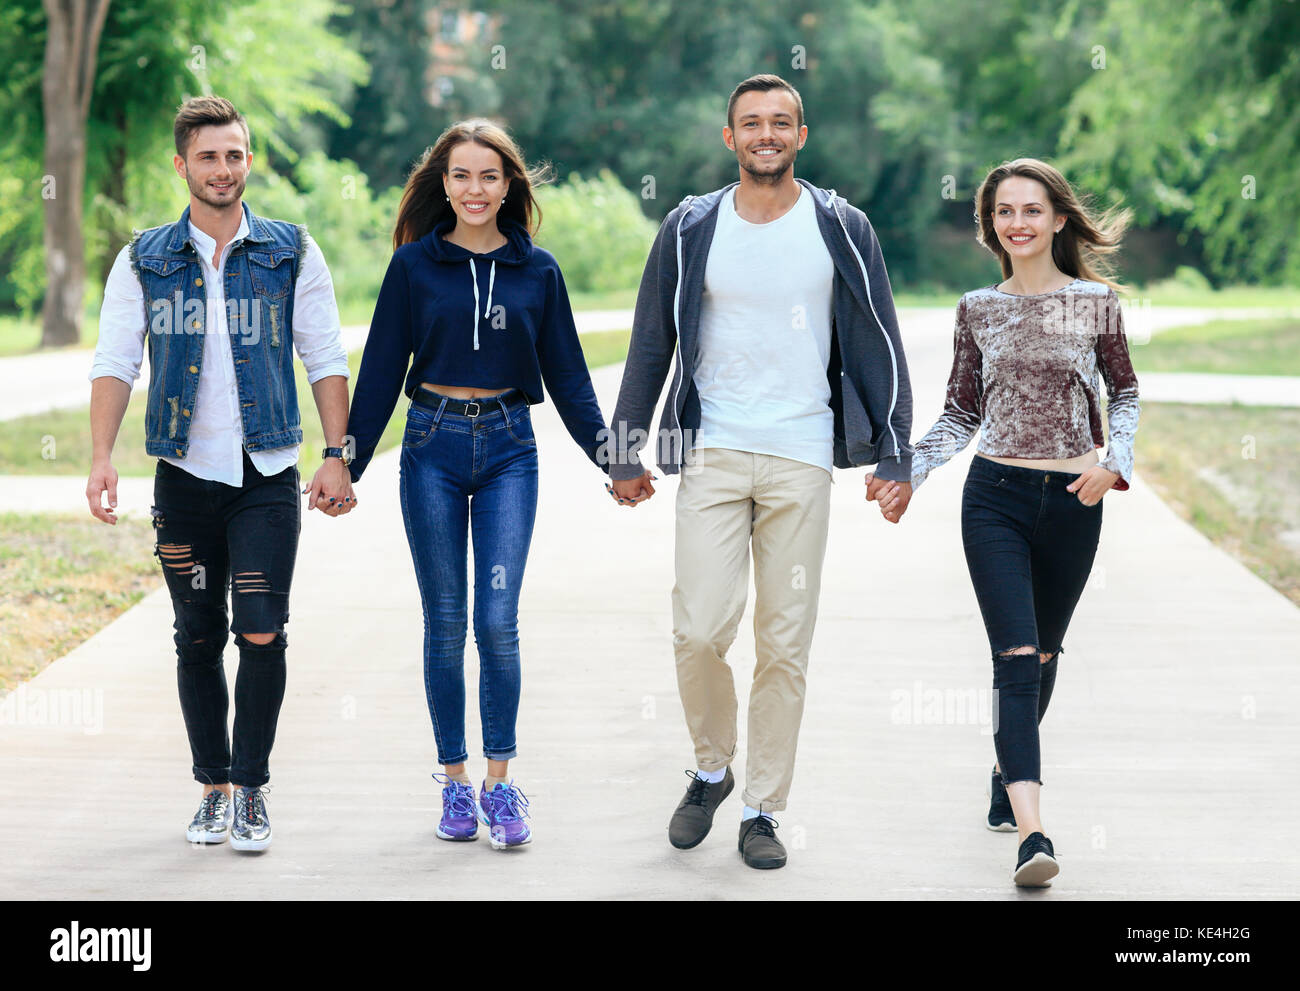 Full-length portrait of young friends holding hands walking in park. Four people happy looking at camera. Two guys and two girls in stylish casual clo Stock Photo